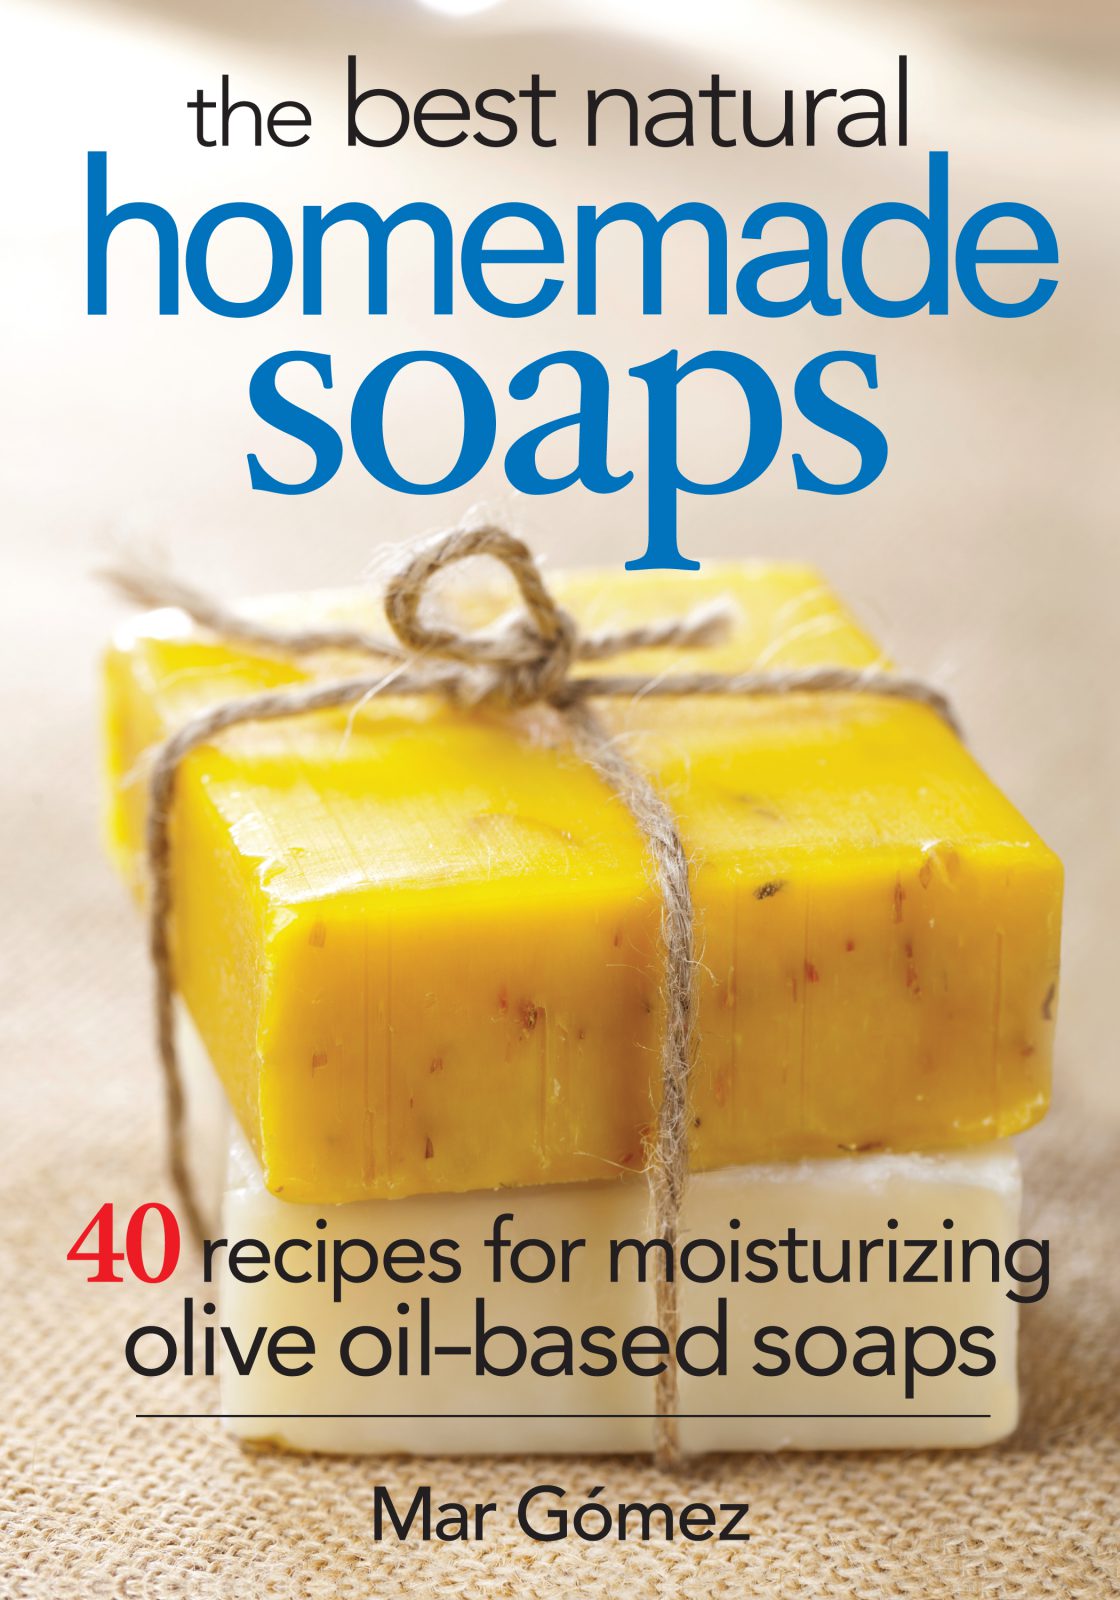 The Best Natural Homemade Soaps